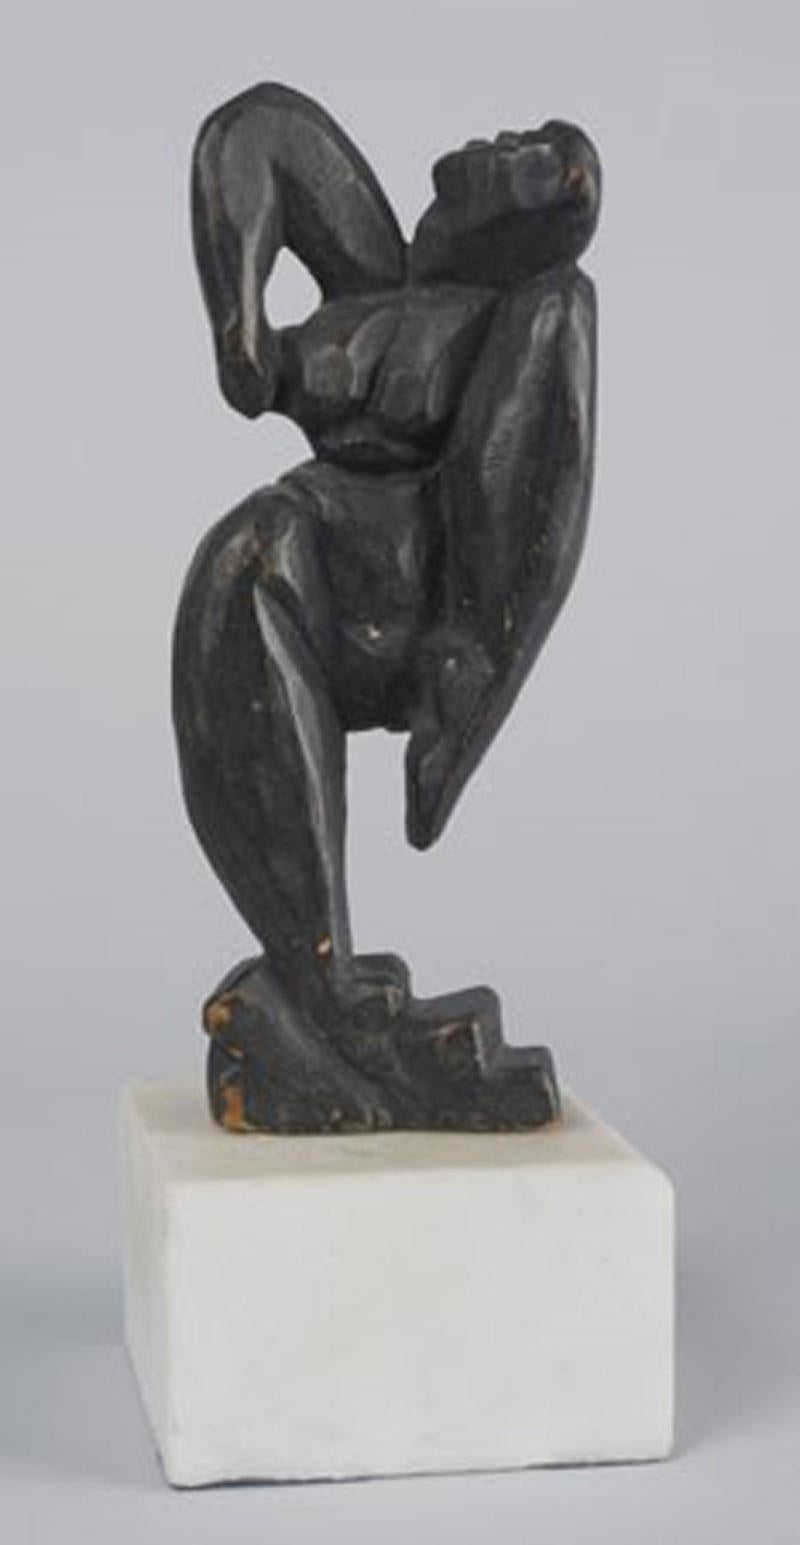 Dancing Figure
Wood carving with pigment,  c. 1913
Unsigned
Provenance: Kuhn Heirs, Maine
                      Kennedy Galleries, New York, until 1983
                      Salandar O'Reilly Galleries (1983-2010)
                      The Orange